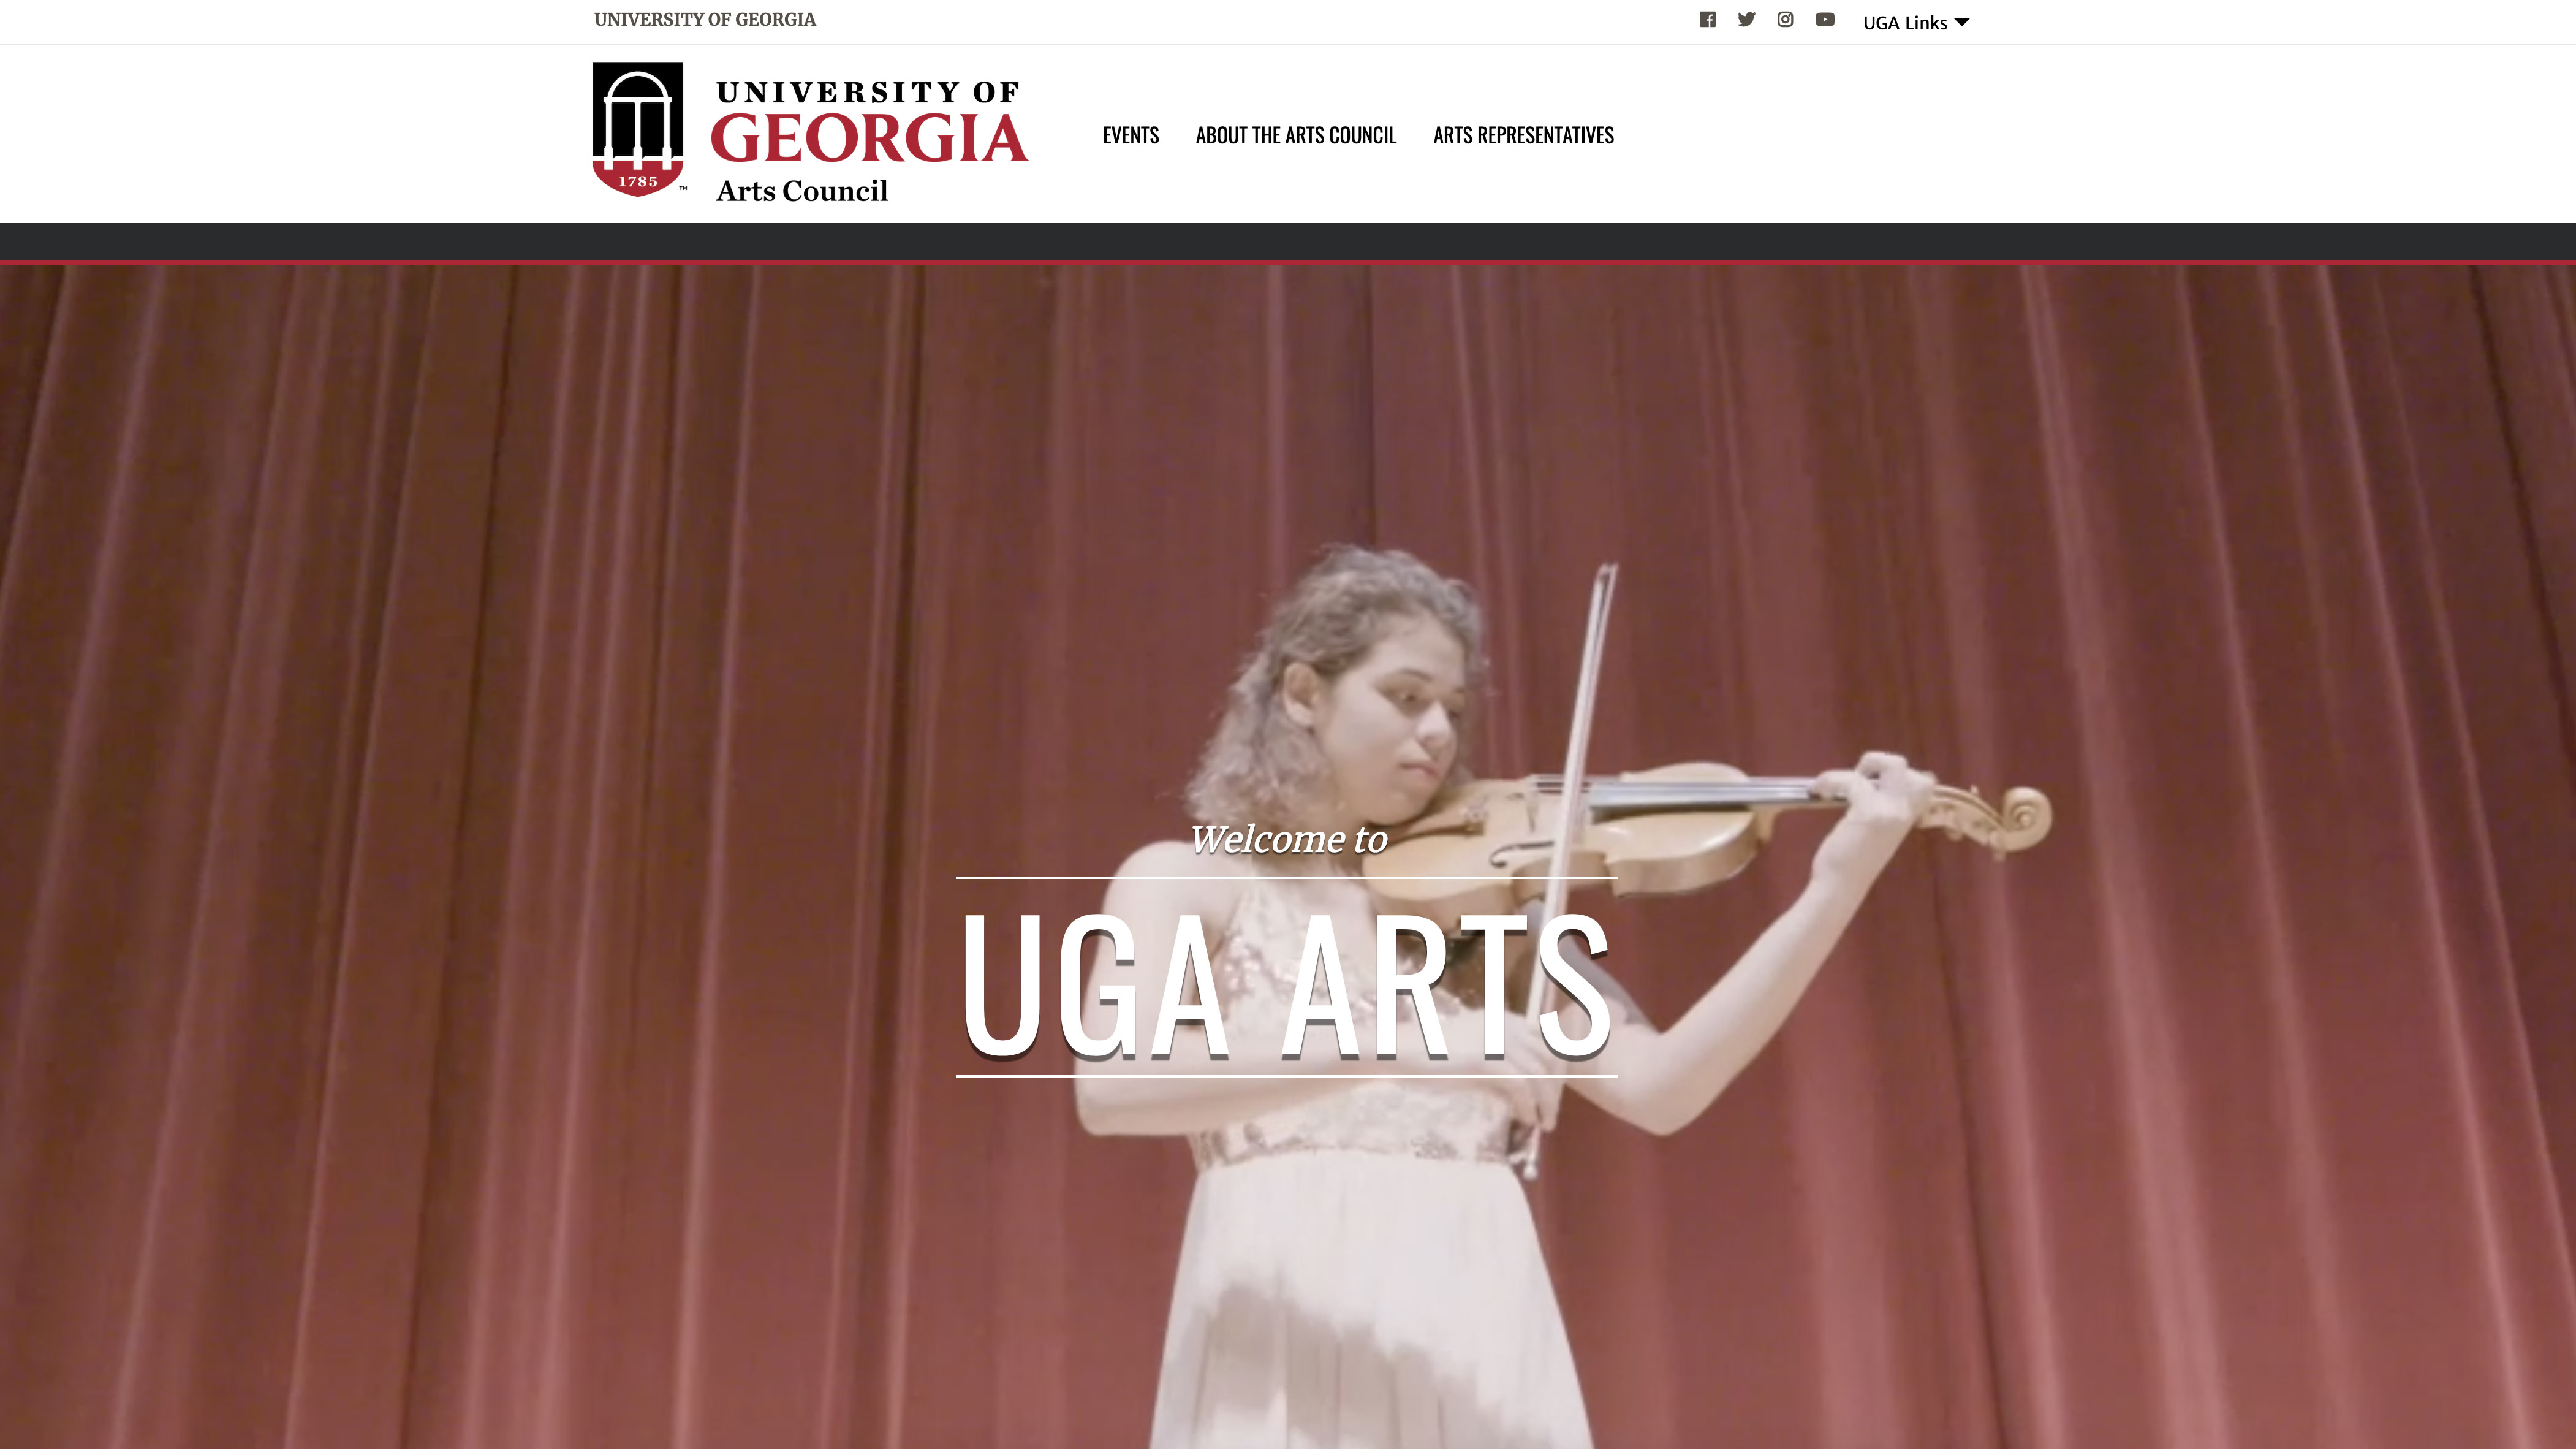 UGA Arts website gets new look with redesign UGA Today